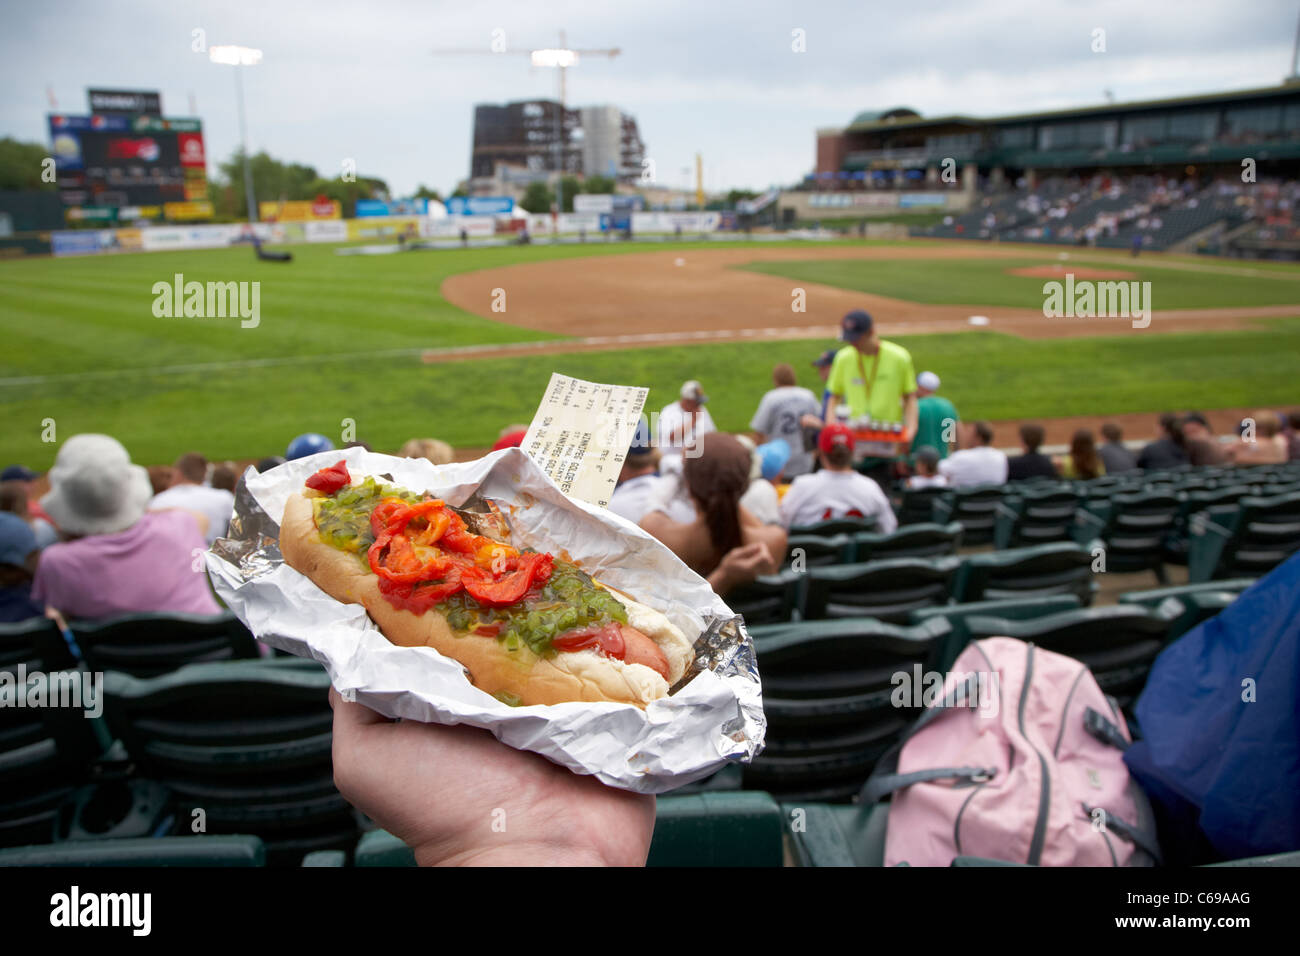 holding hot dog and game ticket sitting in the stand at shaw park baseball stadium formerly canwest home to winnipeg goldeyes Stock Photo